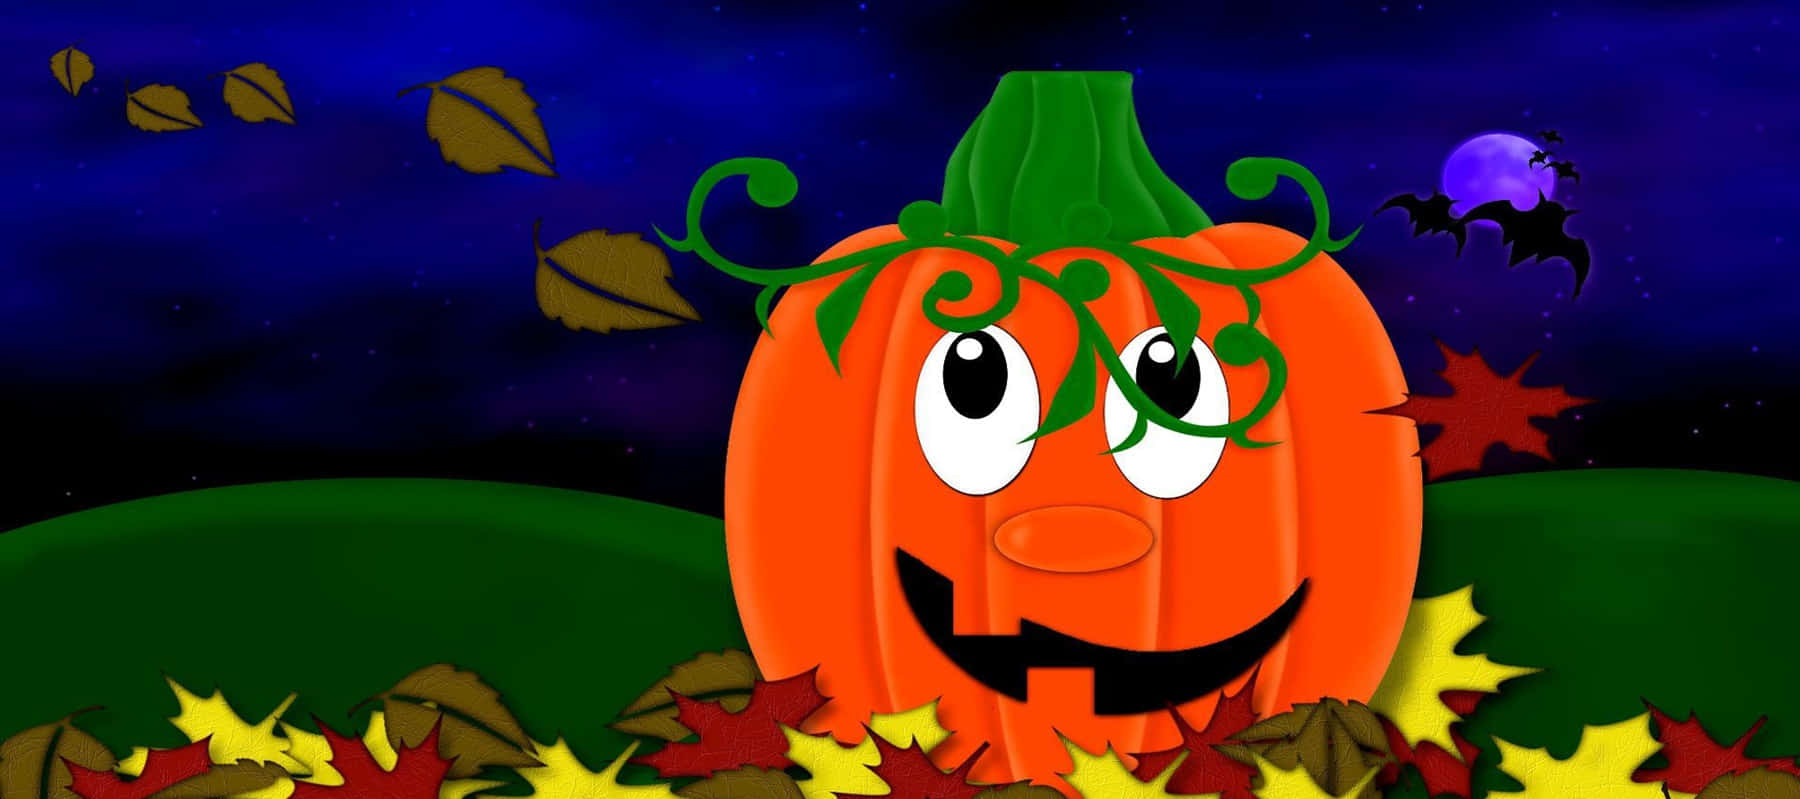 A Cartoon Pumpkin With Leaves And A Moon